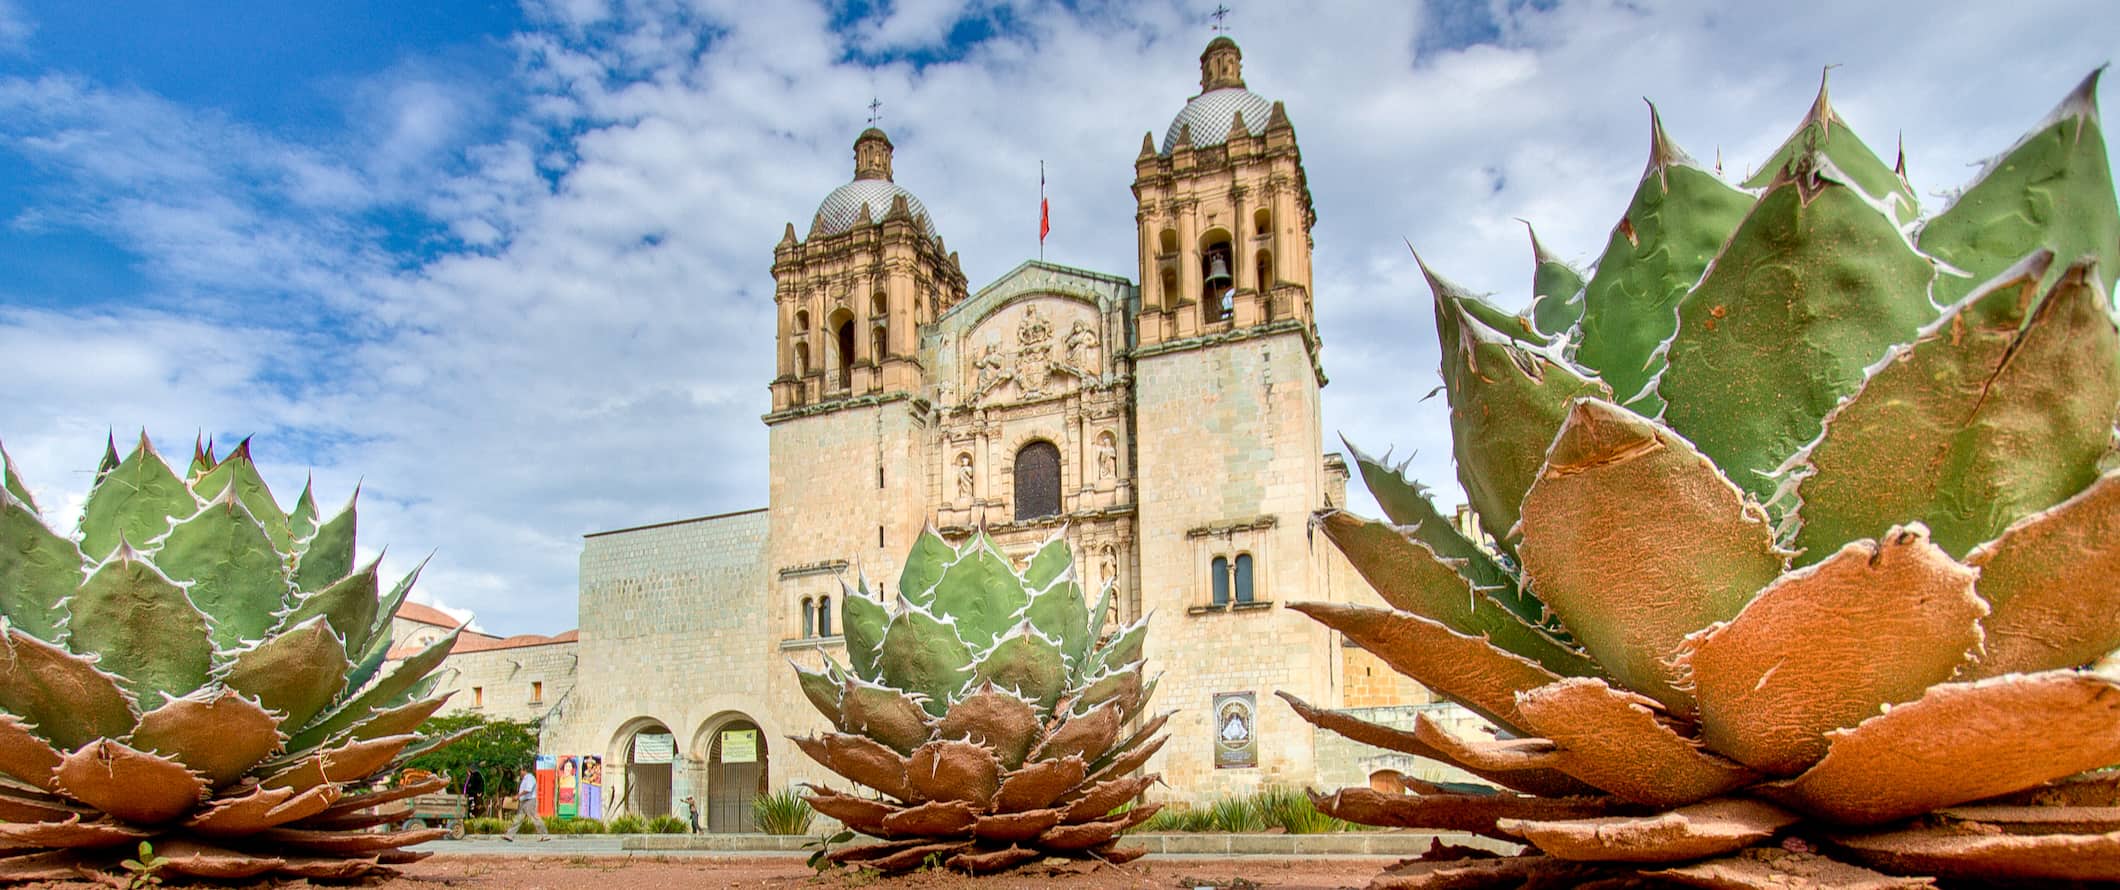 The famous ancient church standing tall in Oaxaca, Mexico